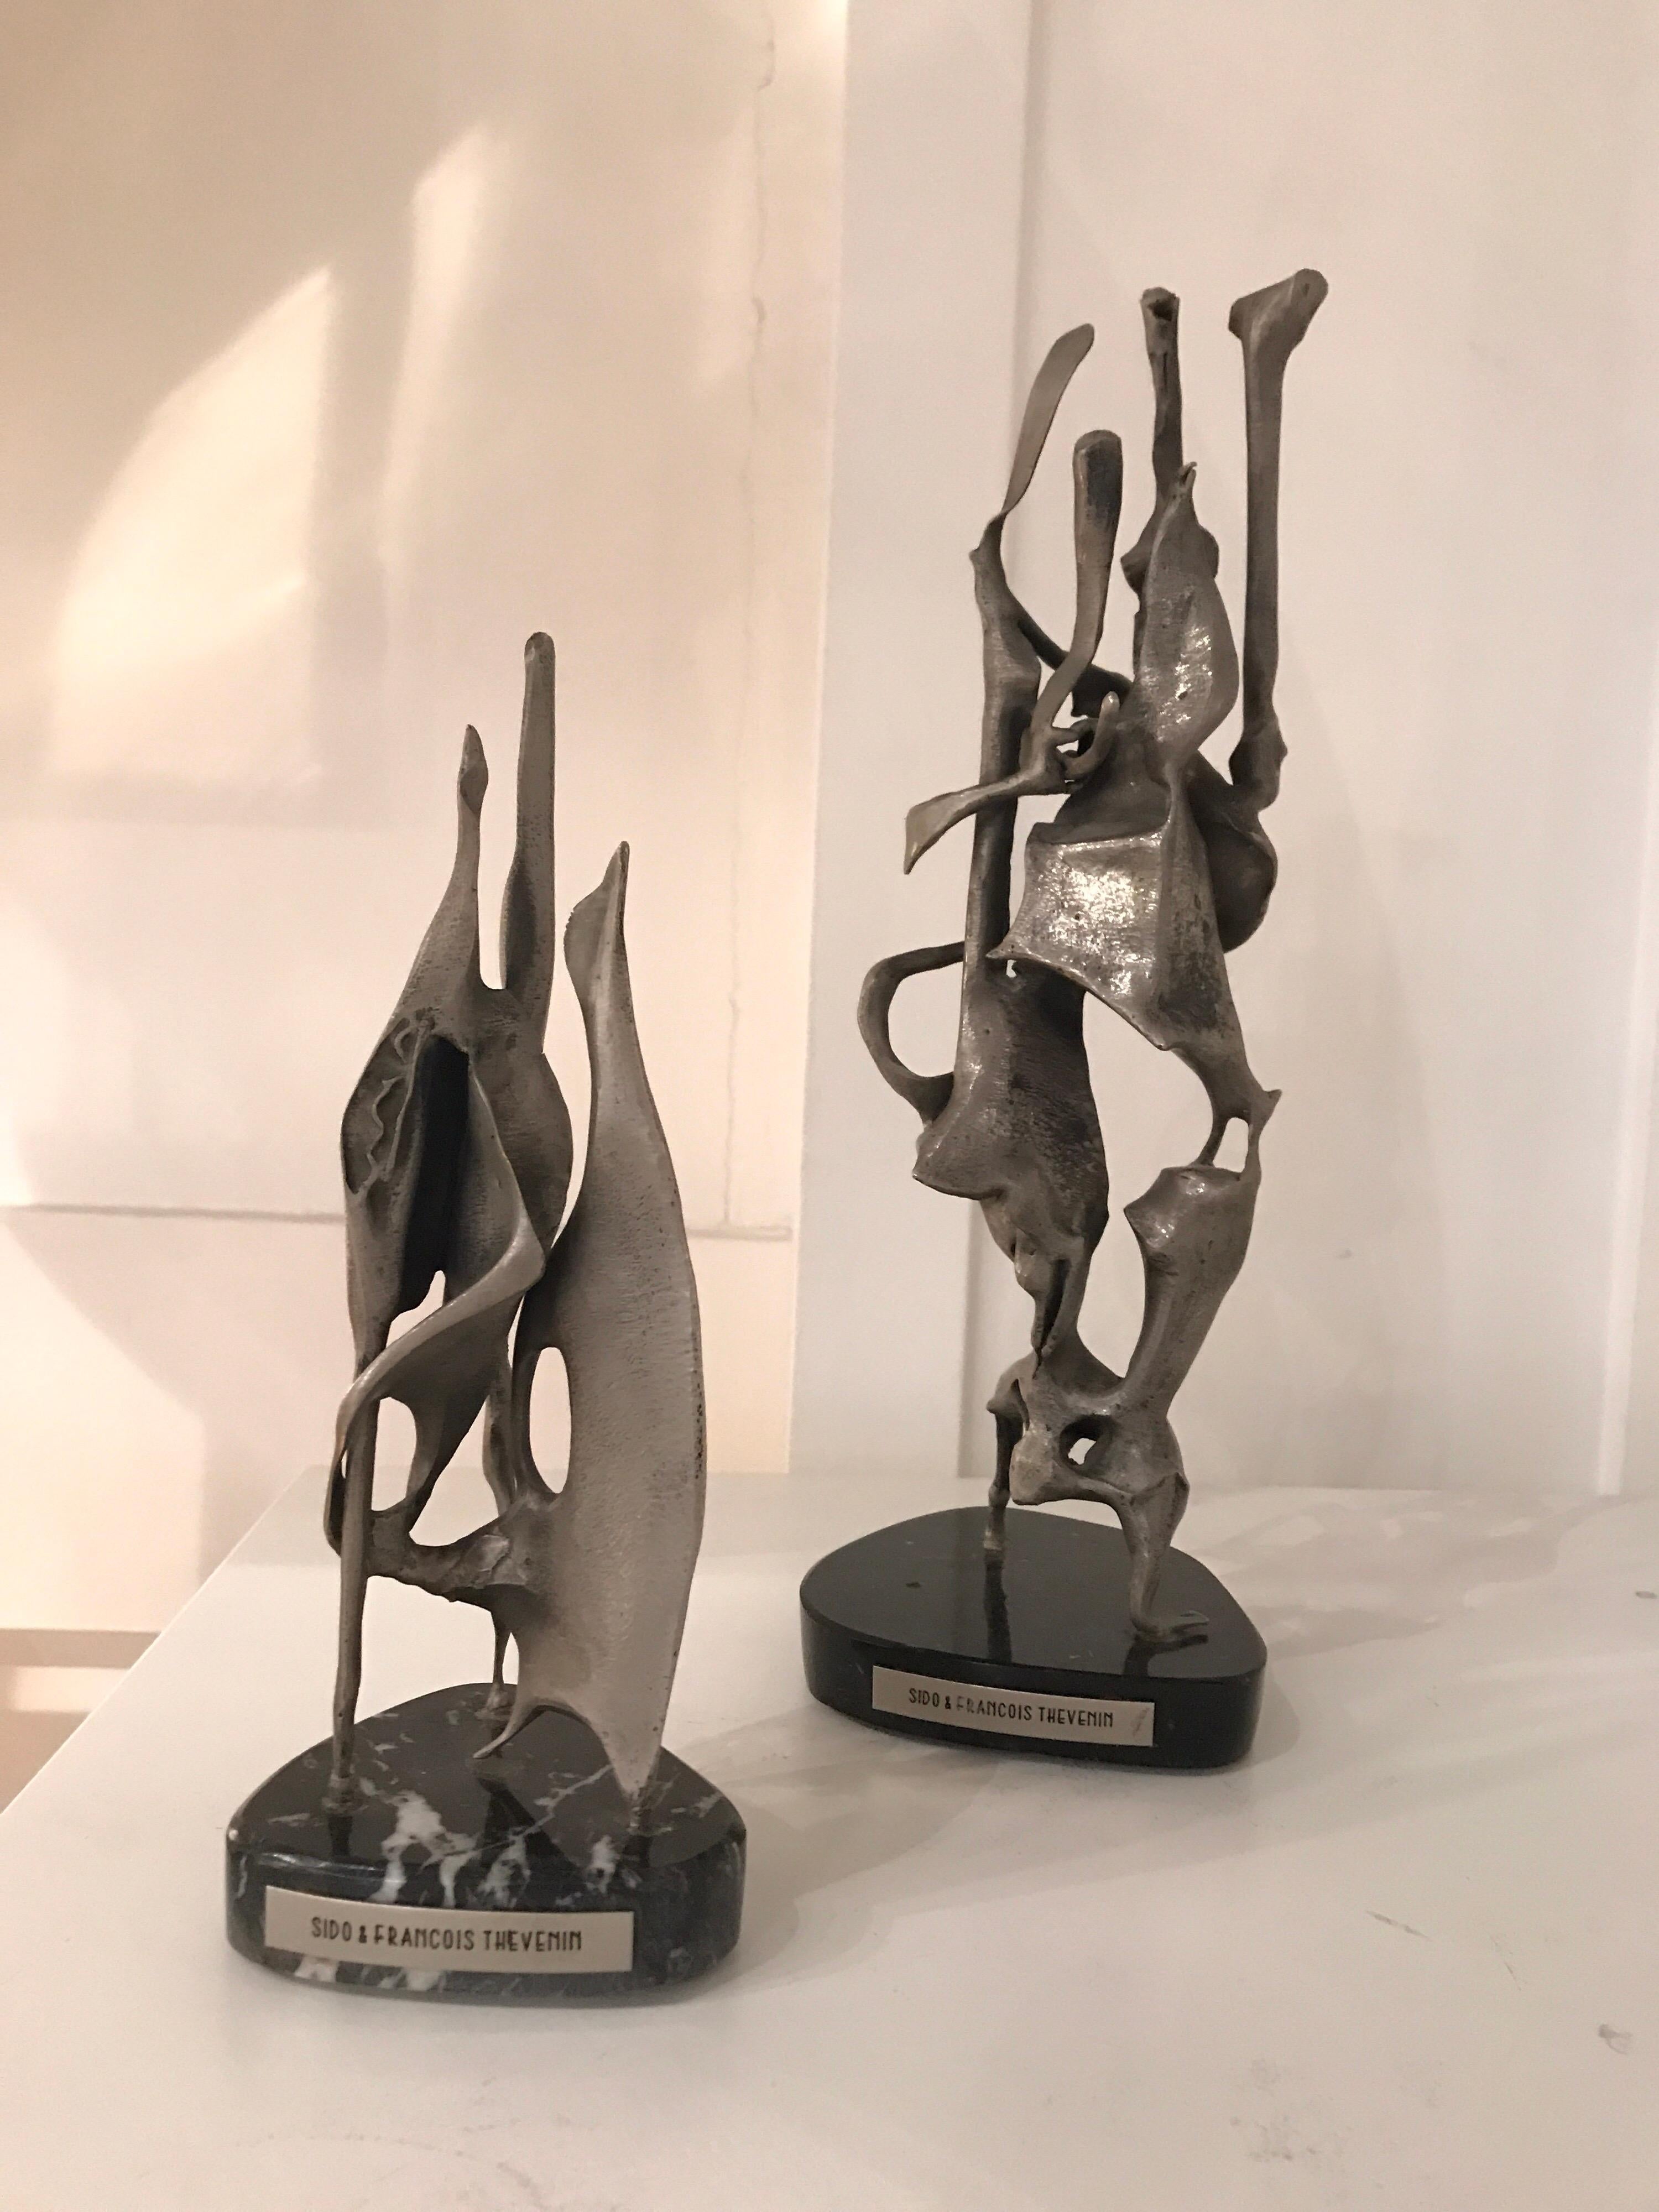 Sido and Francois Thevenin metal abstract sculptures, 1972, France
Hand signed 1972
Mounted on marble bases
Small: 23 cm height 10 cm diameter.